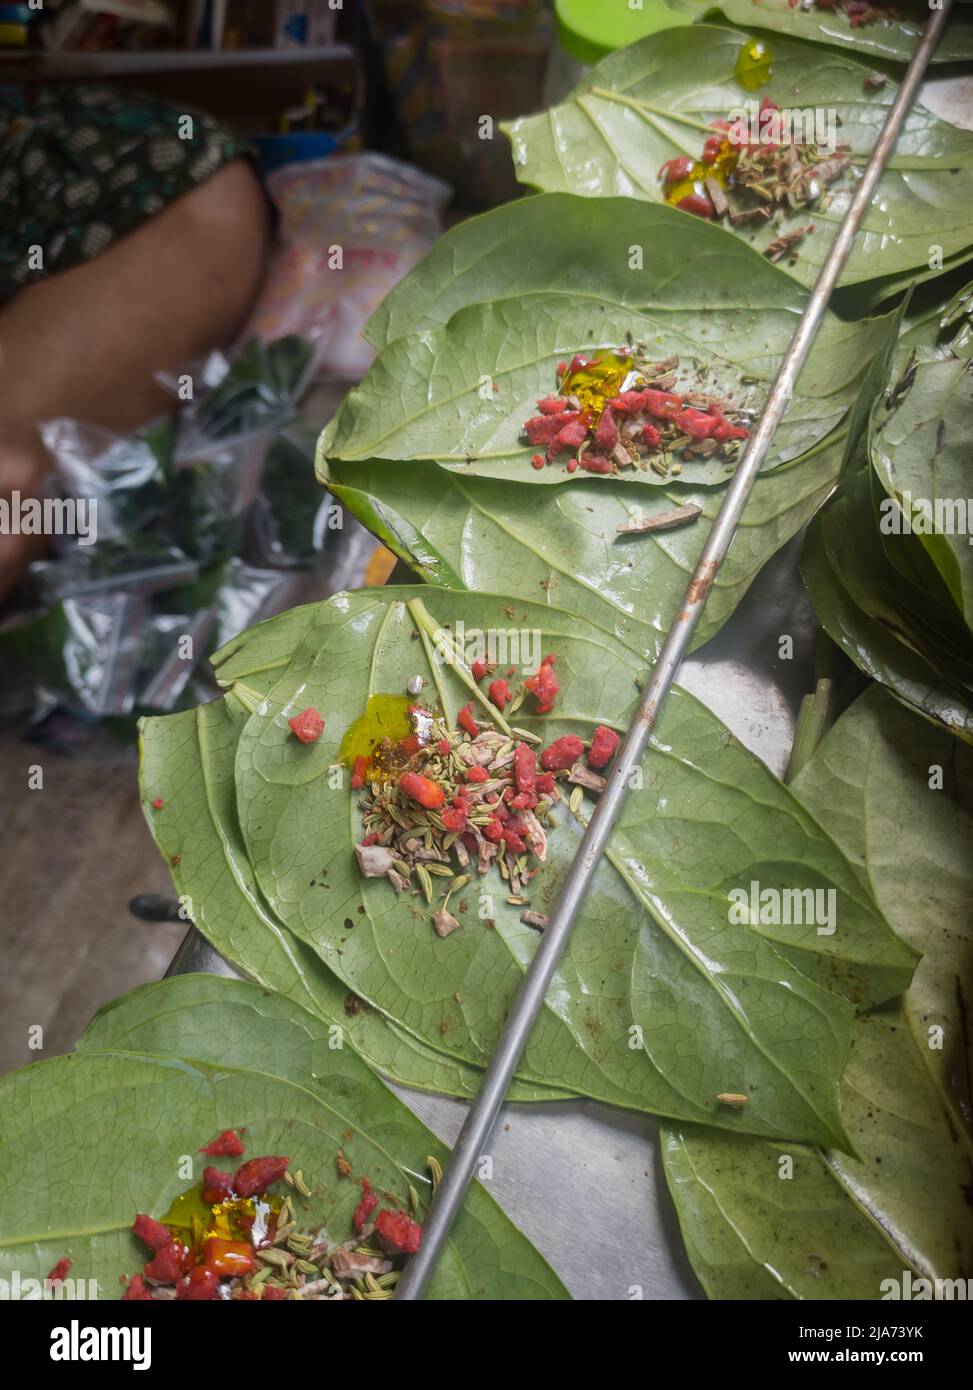 Betel leaves or mitha paan being prepared with ingredients like areka nut or supari and other condiments in a shop for sale in india. A famous practic Stock Photo